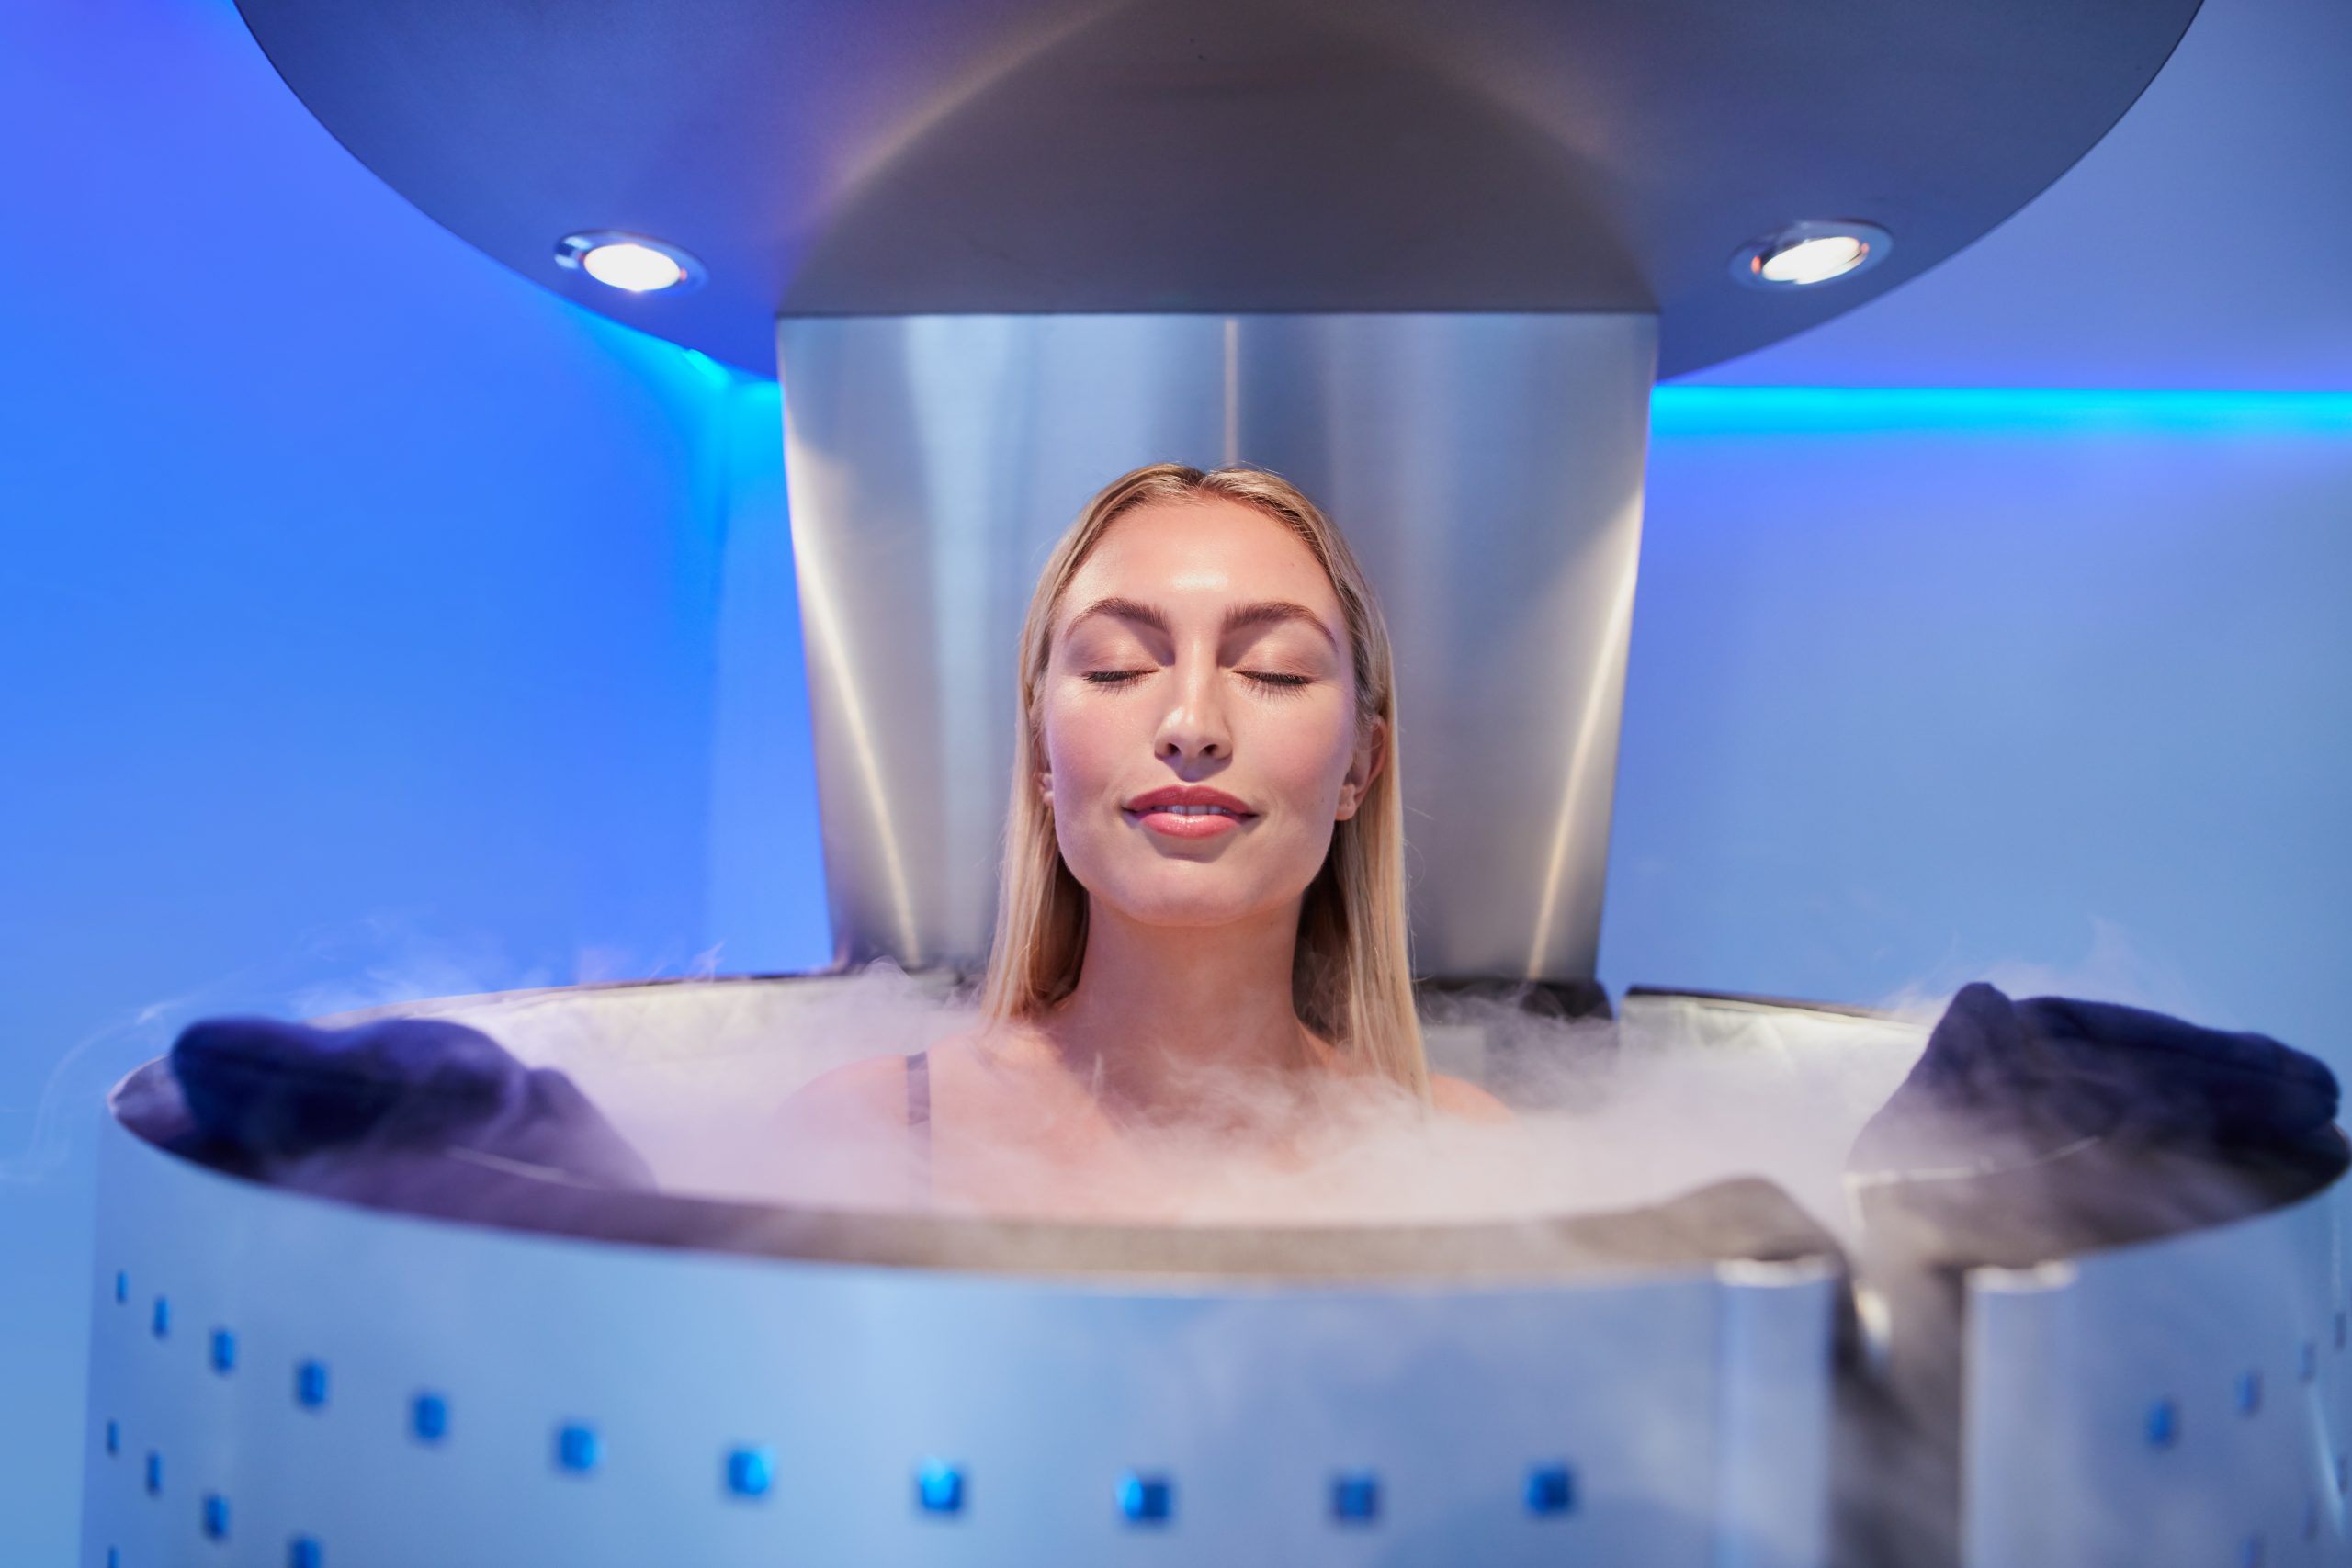 Cryotherapy treatment